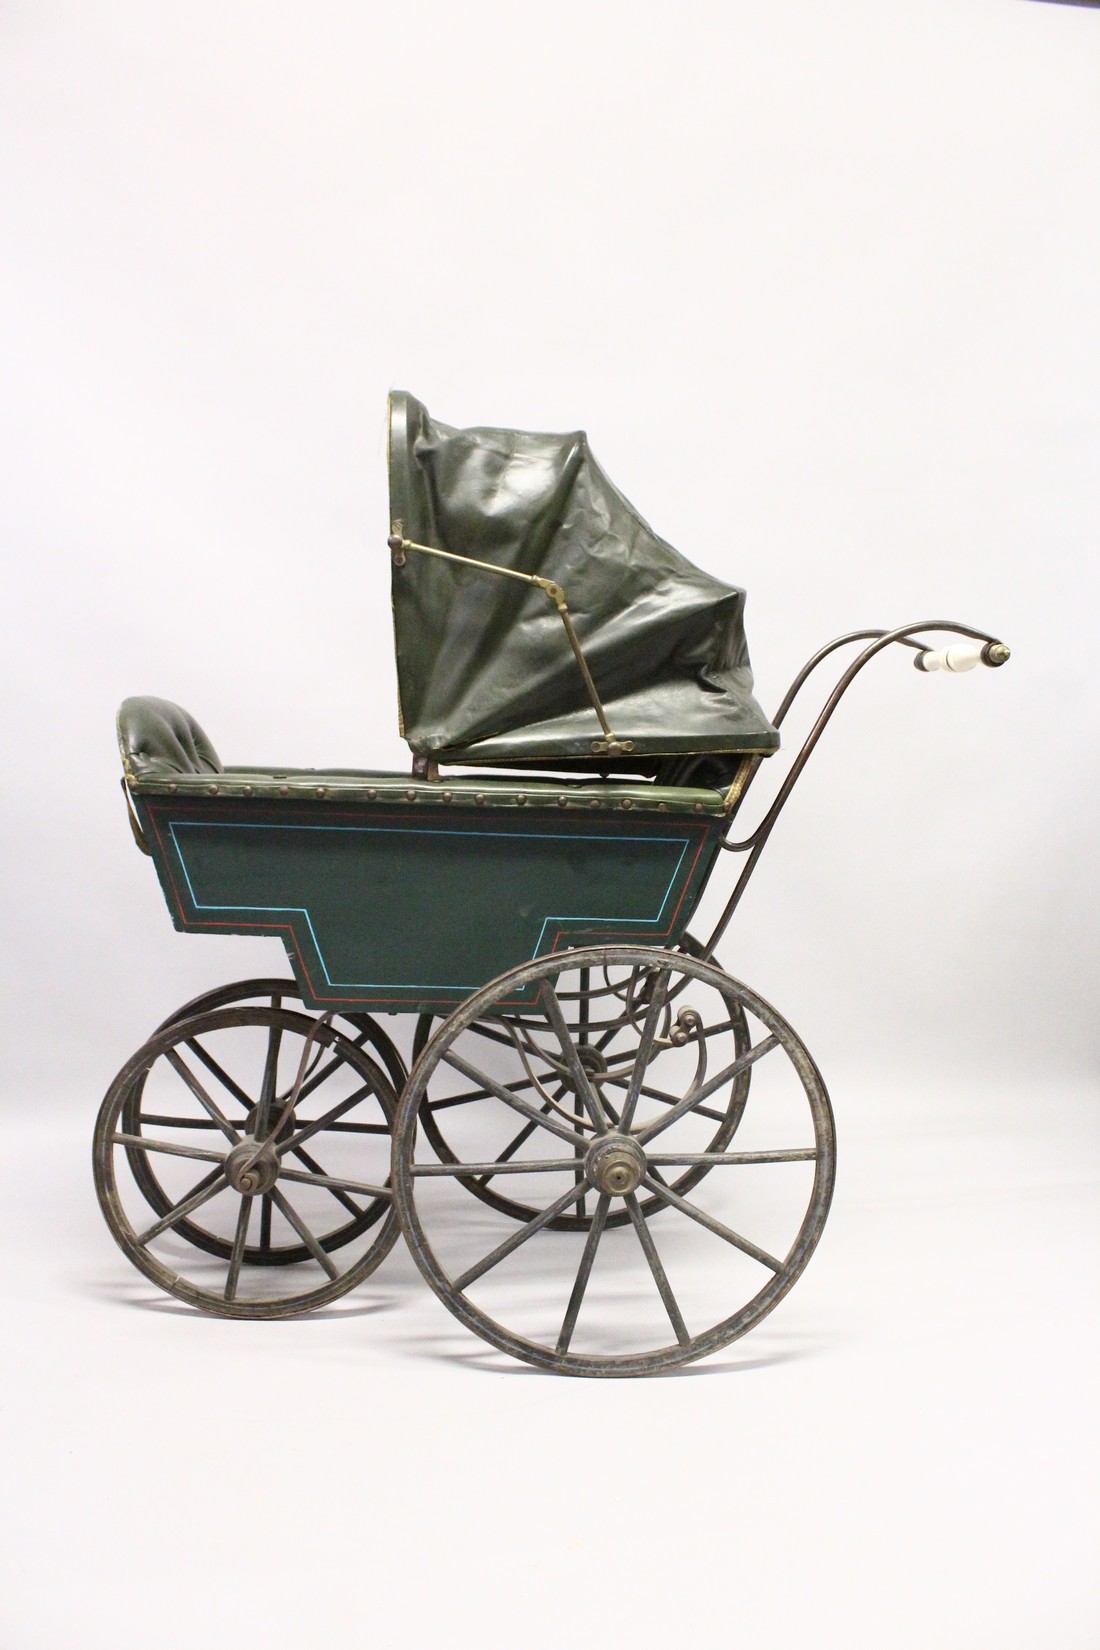 A RARE VICTORIAN METAL, WOOD AND LEATHER PRAM with folding hood, porcelain handles, wooden wheels. - Image 4 of 7